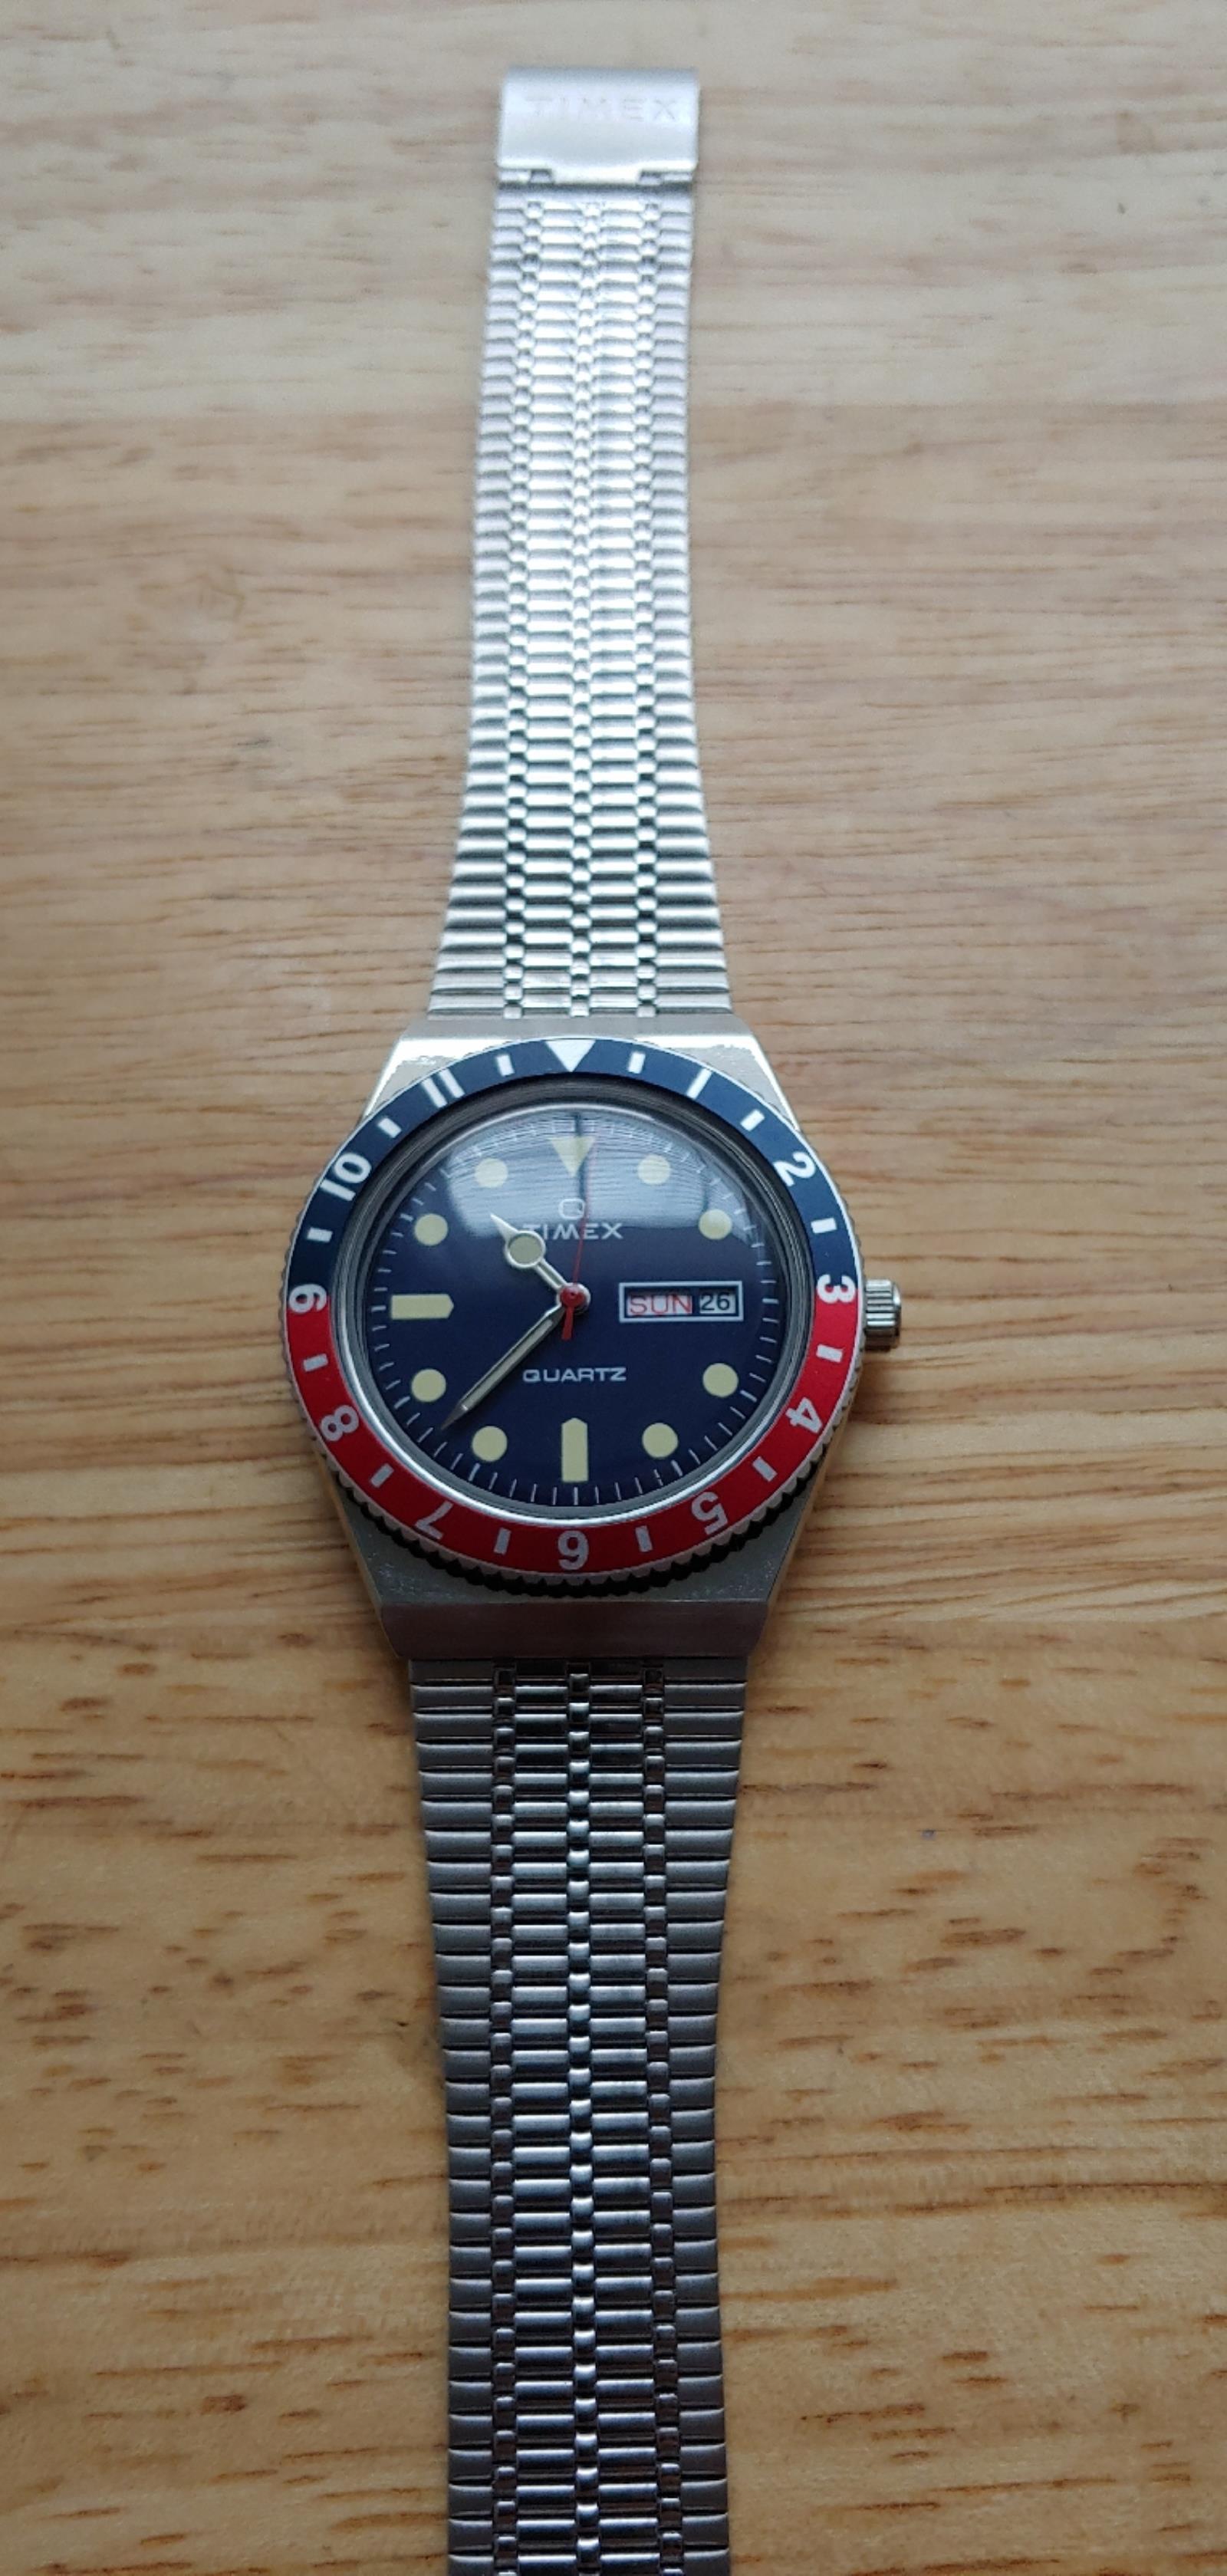 Timex Q re-issue